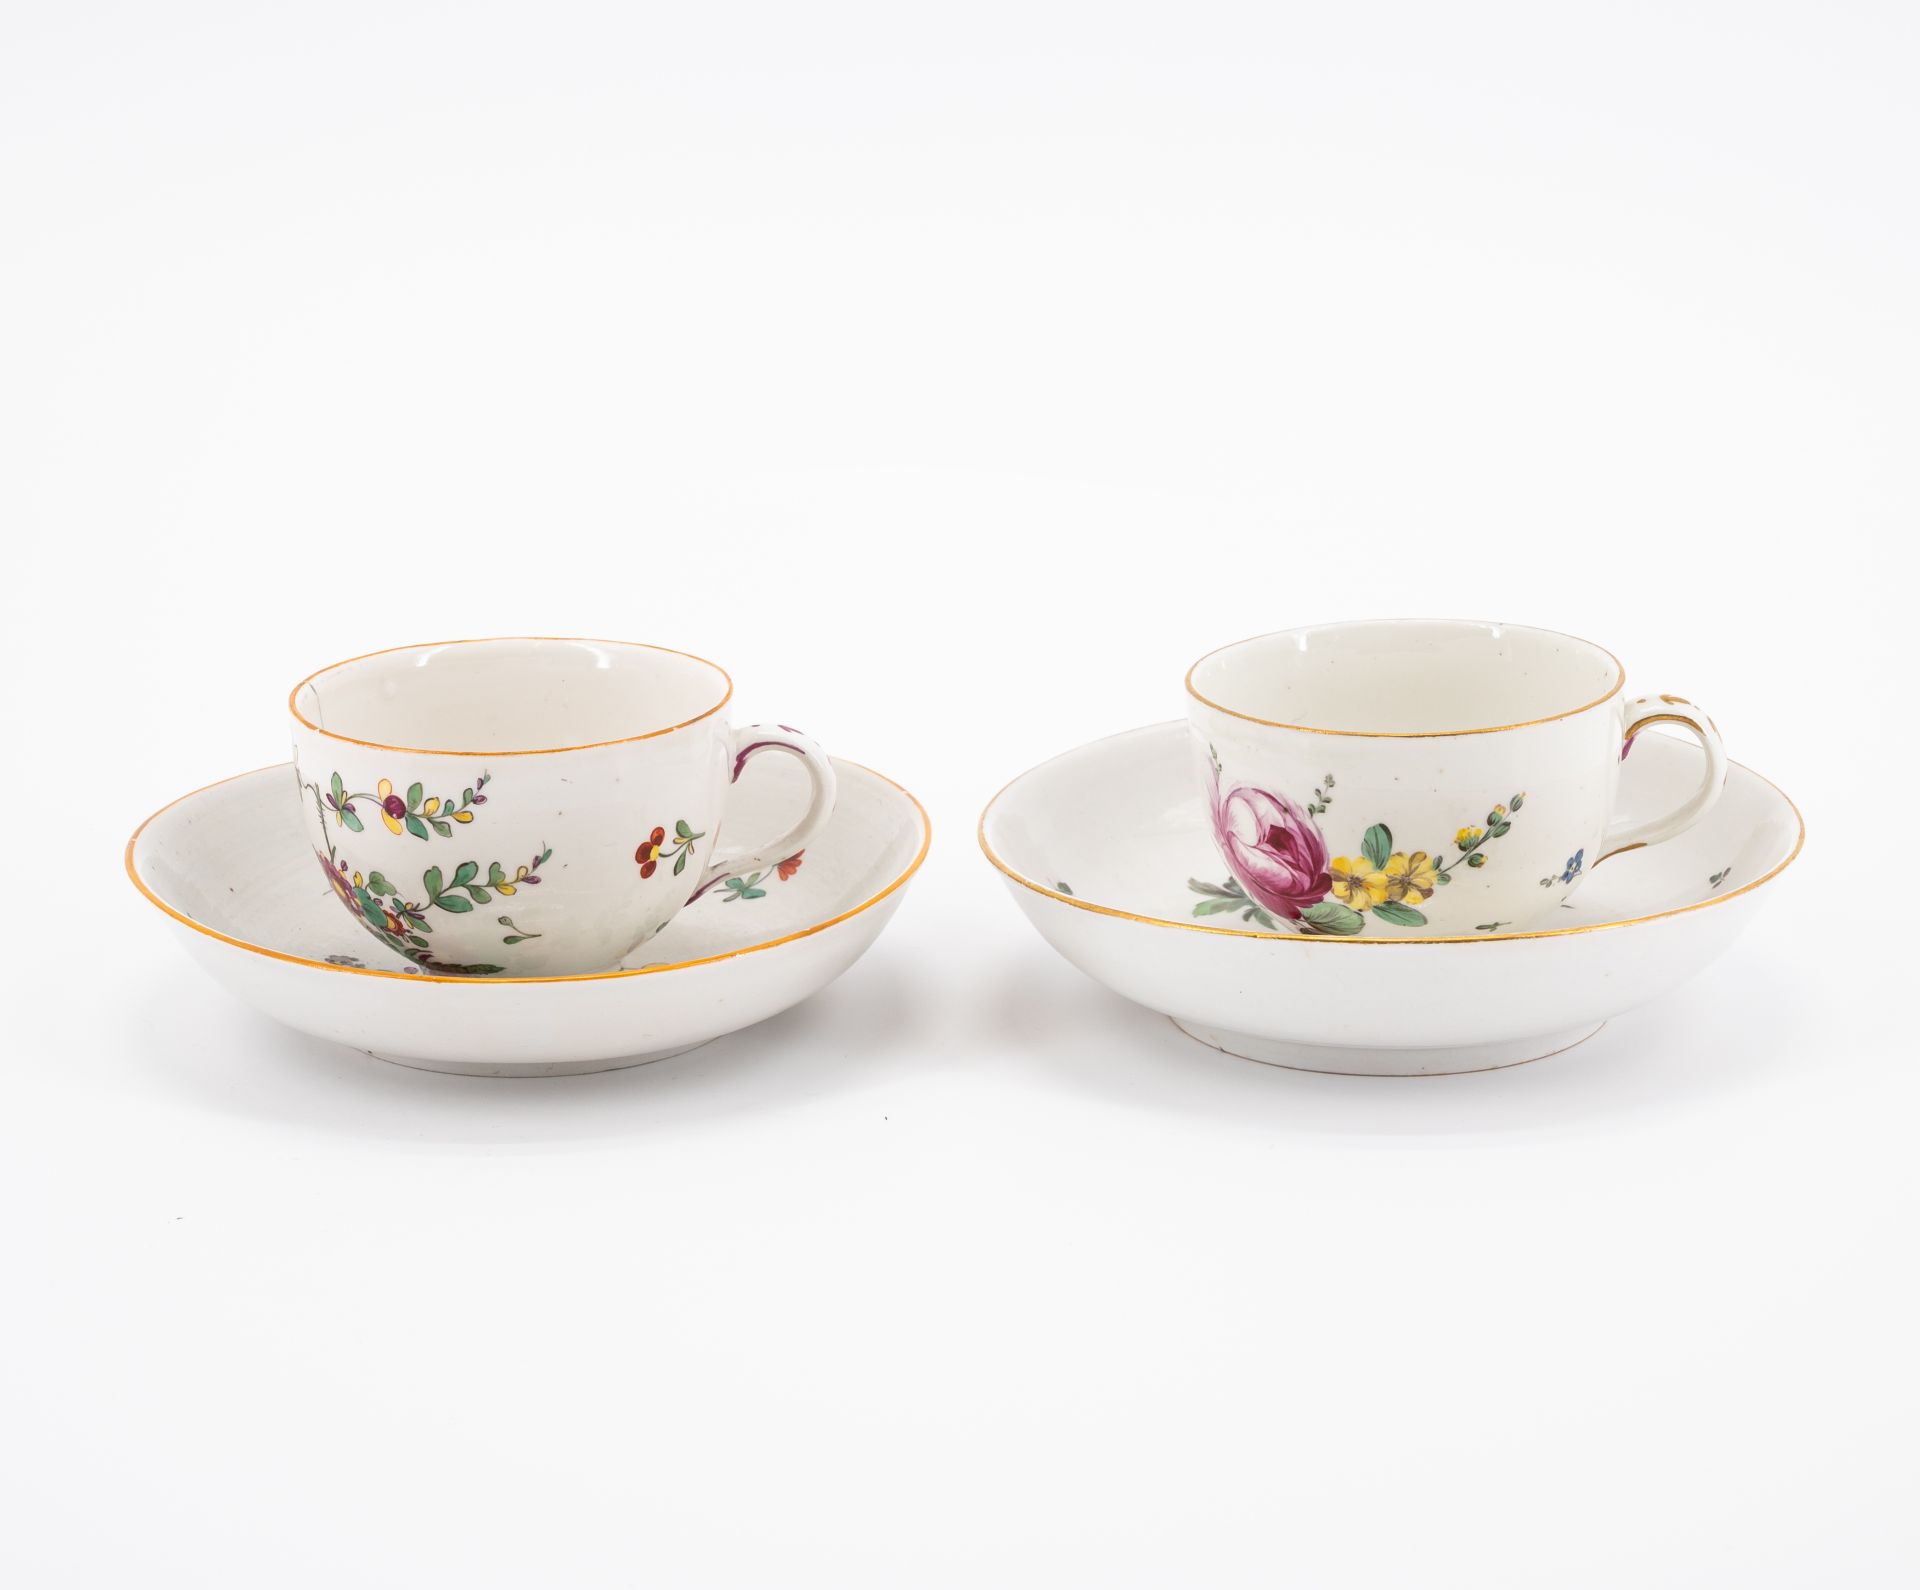 SIX PORCELAIN CUPS AND THREE SAUCERS WITH BIRD DECOR, FLOWERS AND LANDSCAPE SCENES - Image 7 of 16